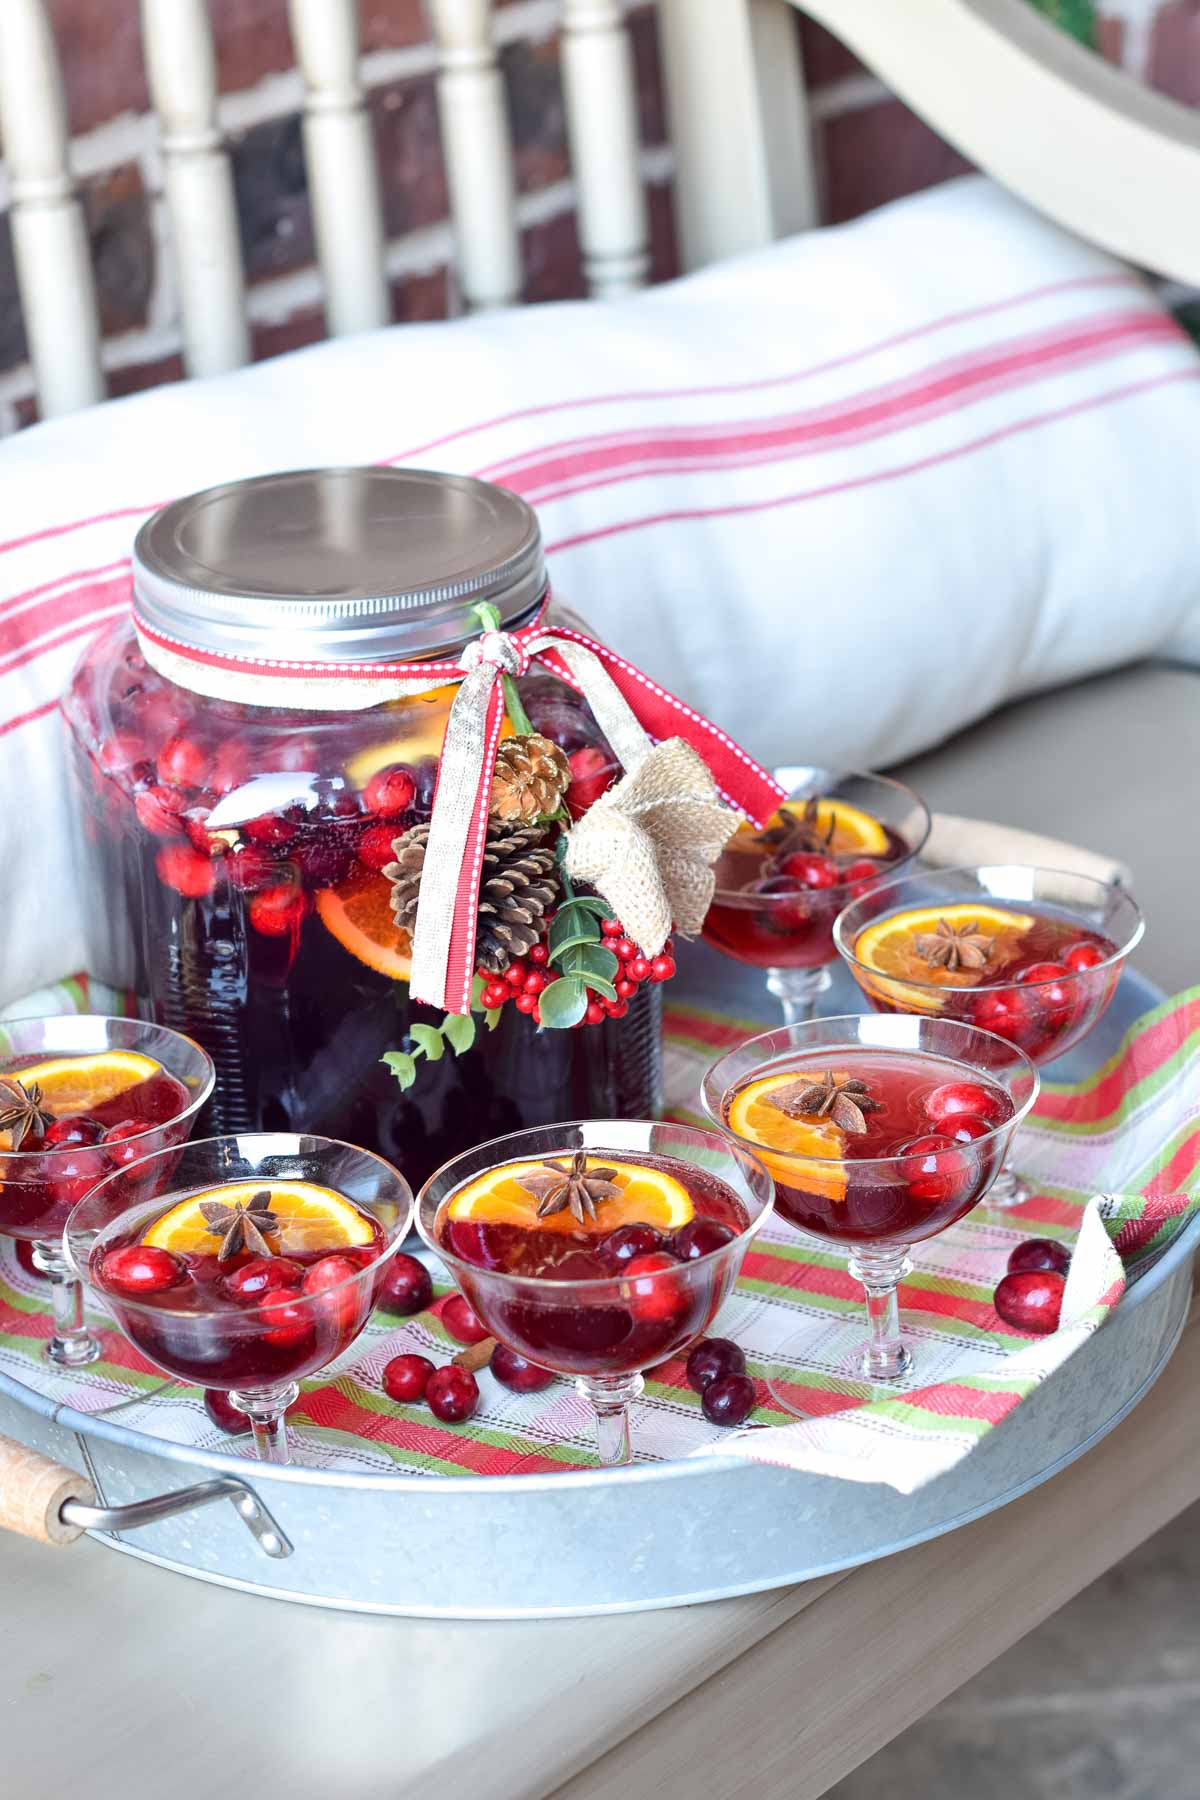 Holiday punches don't have to be served in a punch bowl. This punch is served in a gallon sized glass cracker jar